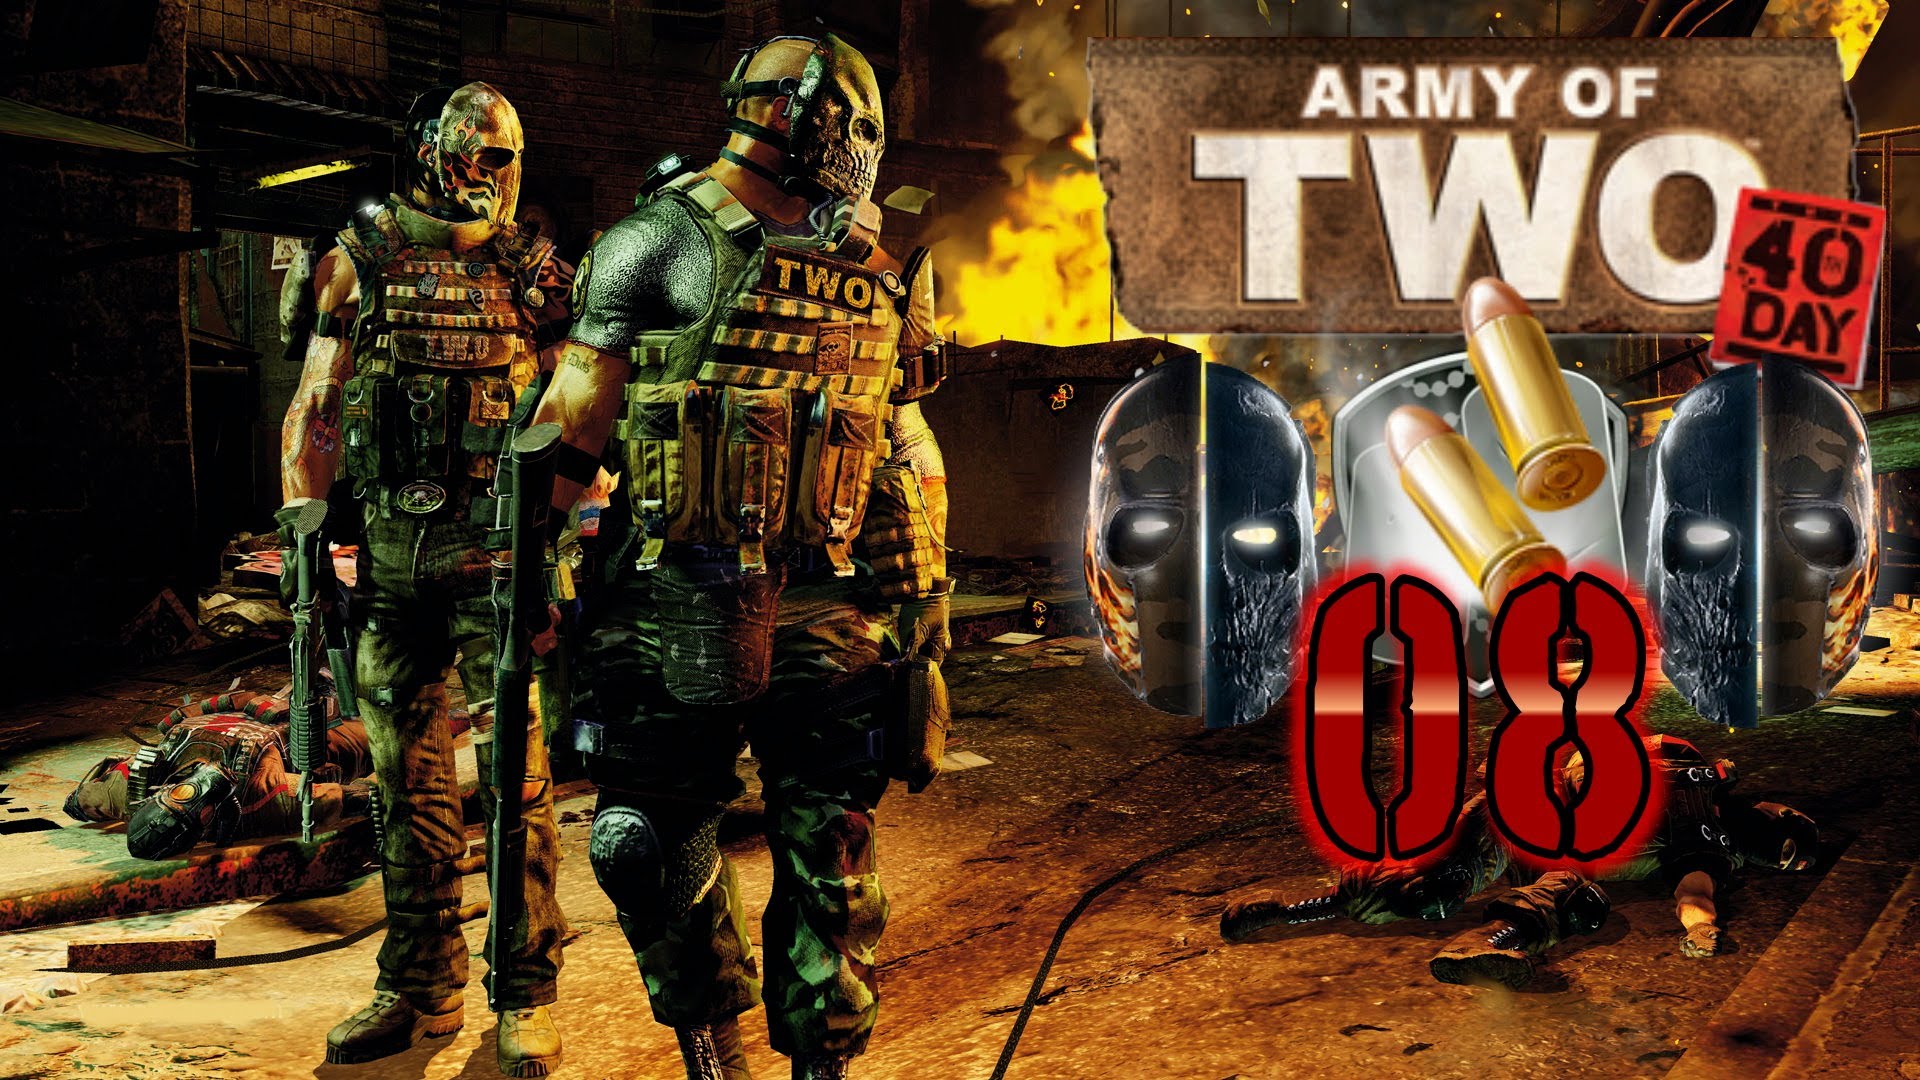 Army Of Two Hd Wallpaper - Tyson Rios Army Of Two 40th Day , HD Wallpaper & Backgrounds